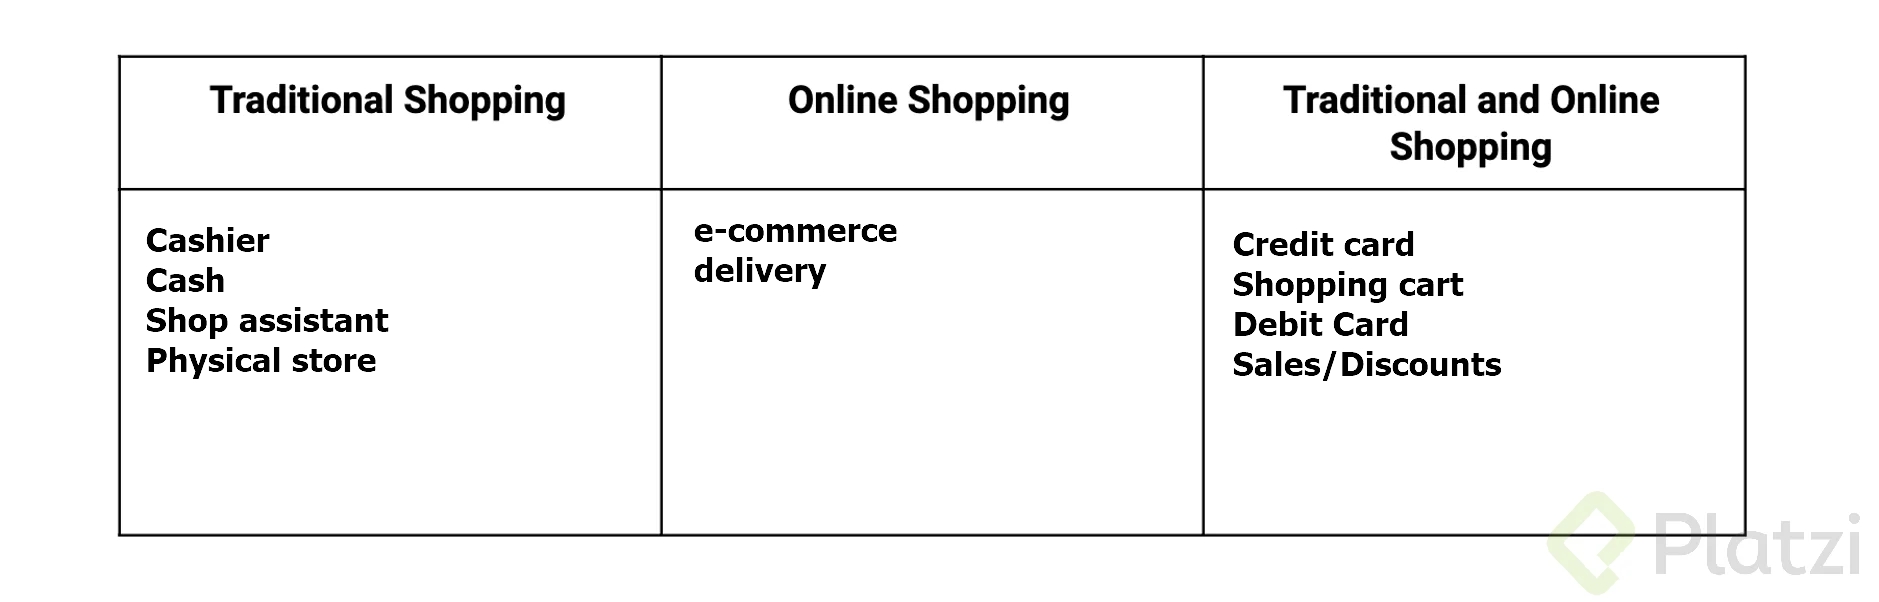 imilarities and differences between traditional and online shopping